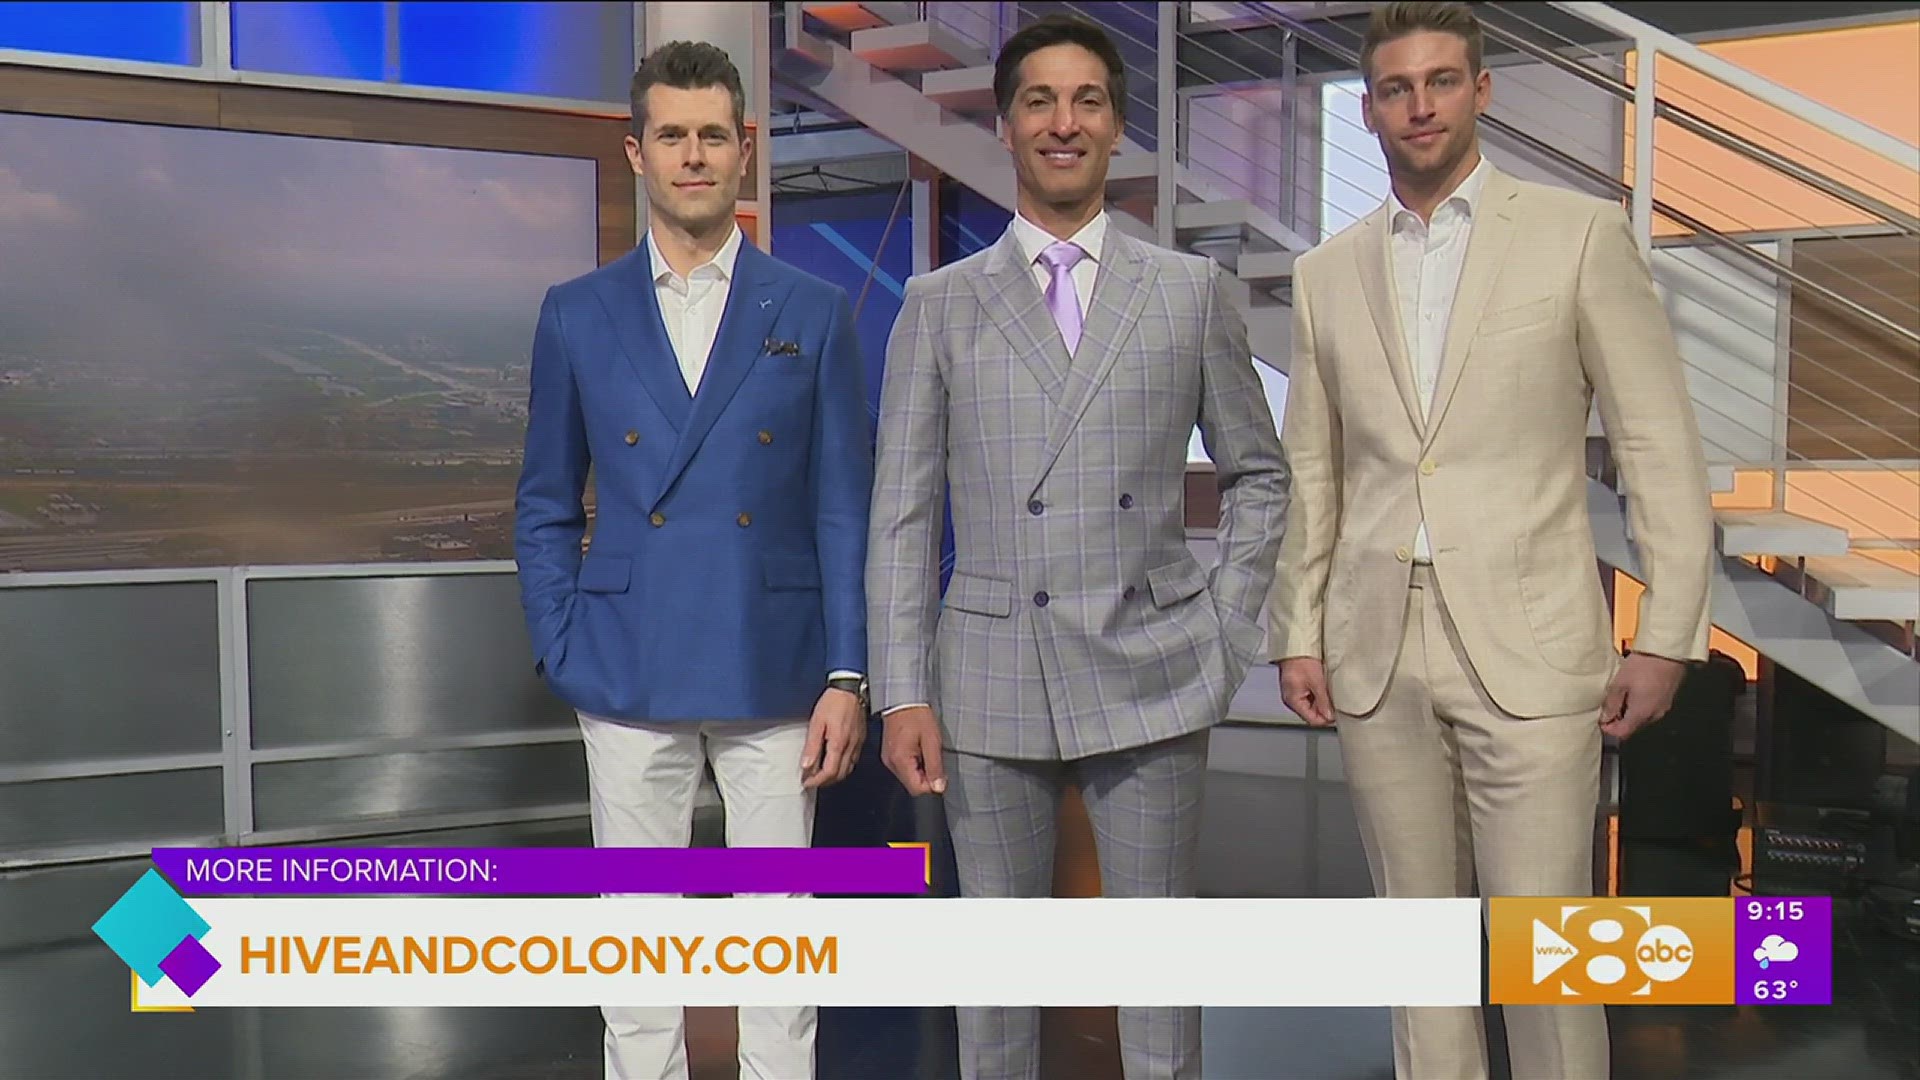 Pablo Mendez with Hive&Colony from Northpark show us stylish suits for Spring and how to get the perfect fit. Go to hiveandcolony.com for more information.